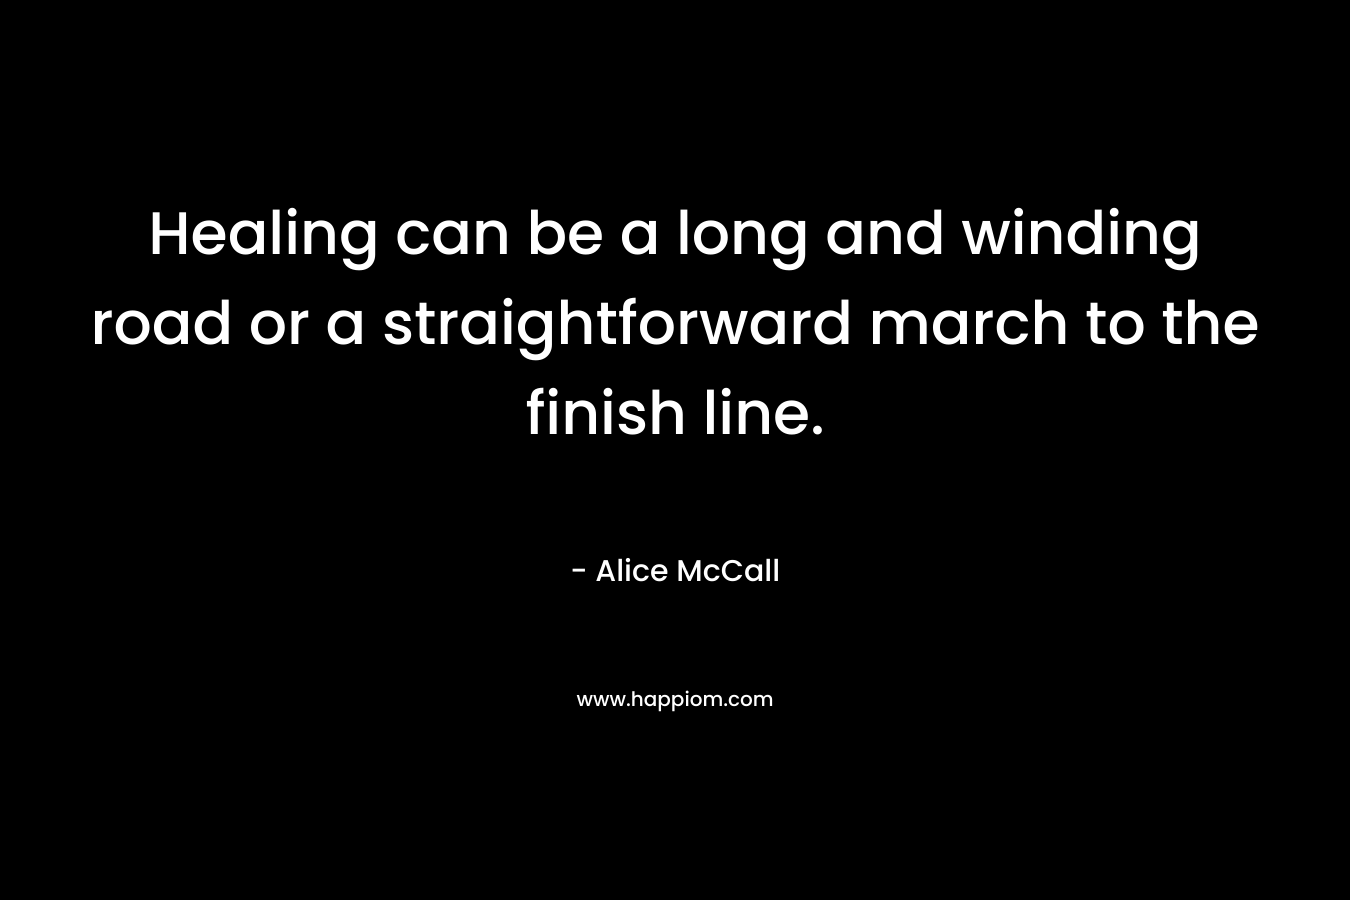 Healing can be a long and winding road or a straightforward march to the finish line. – Alice McCall